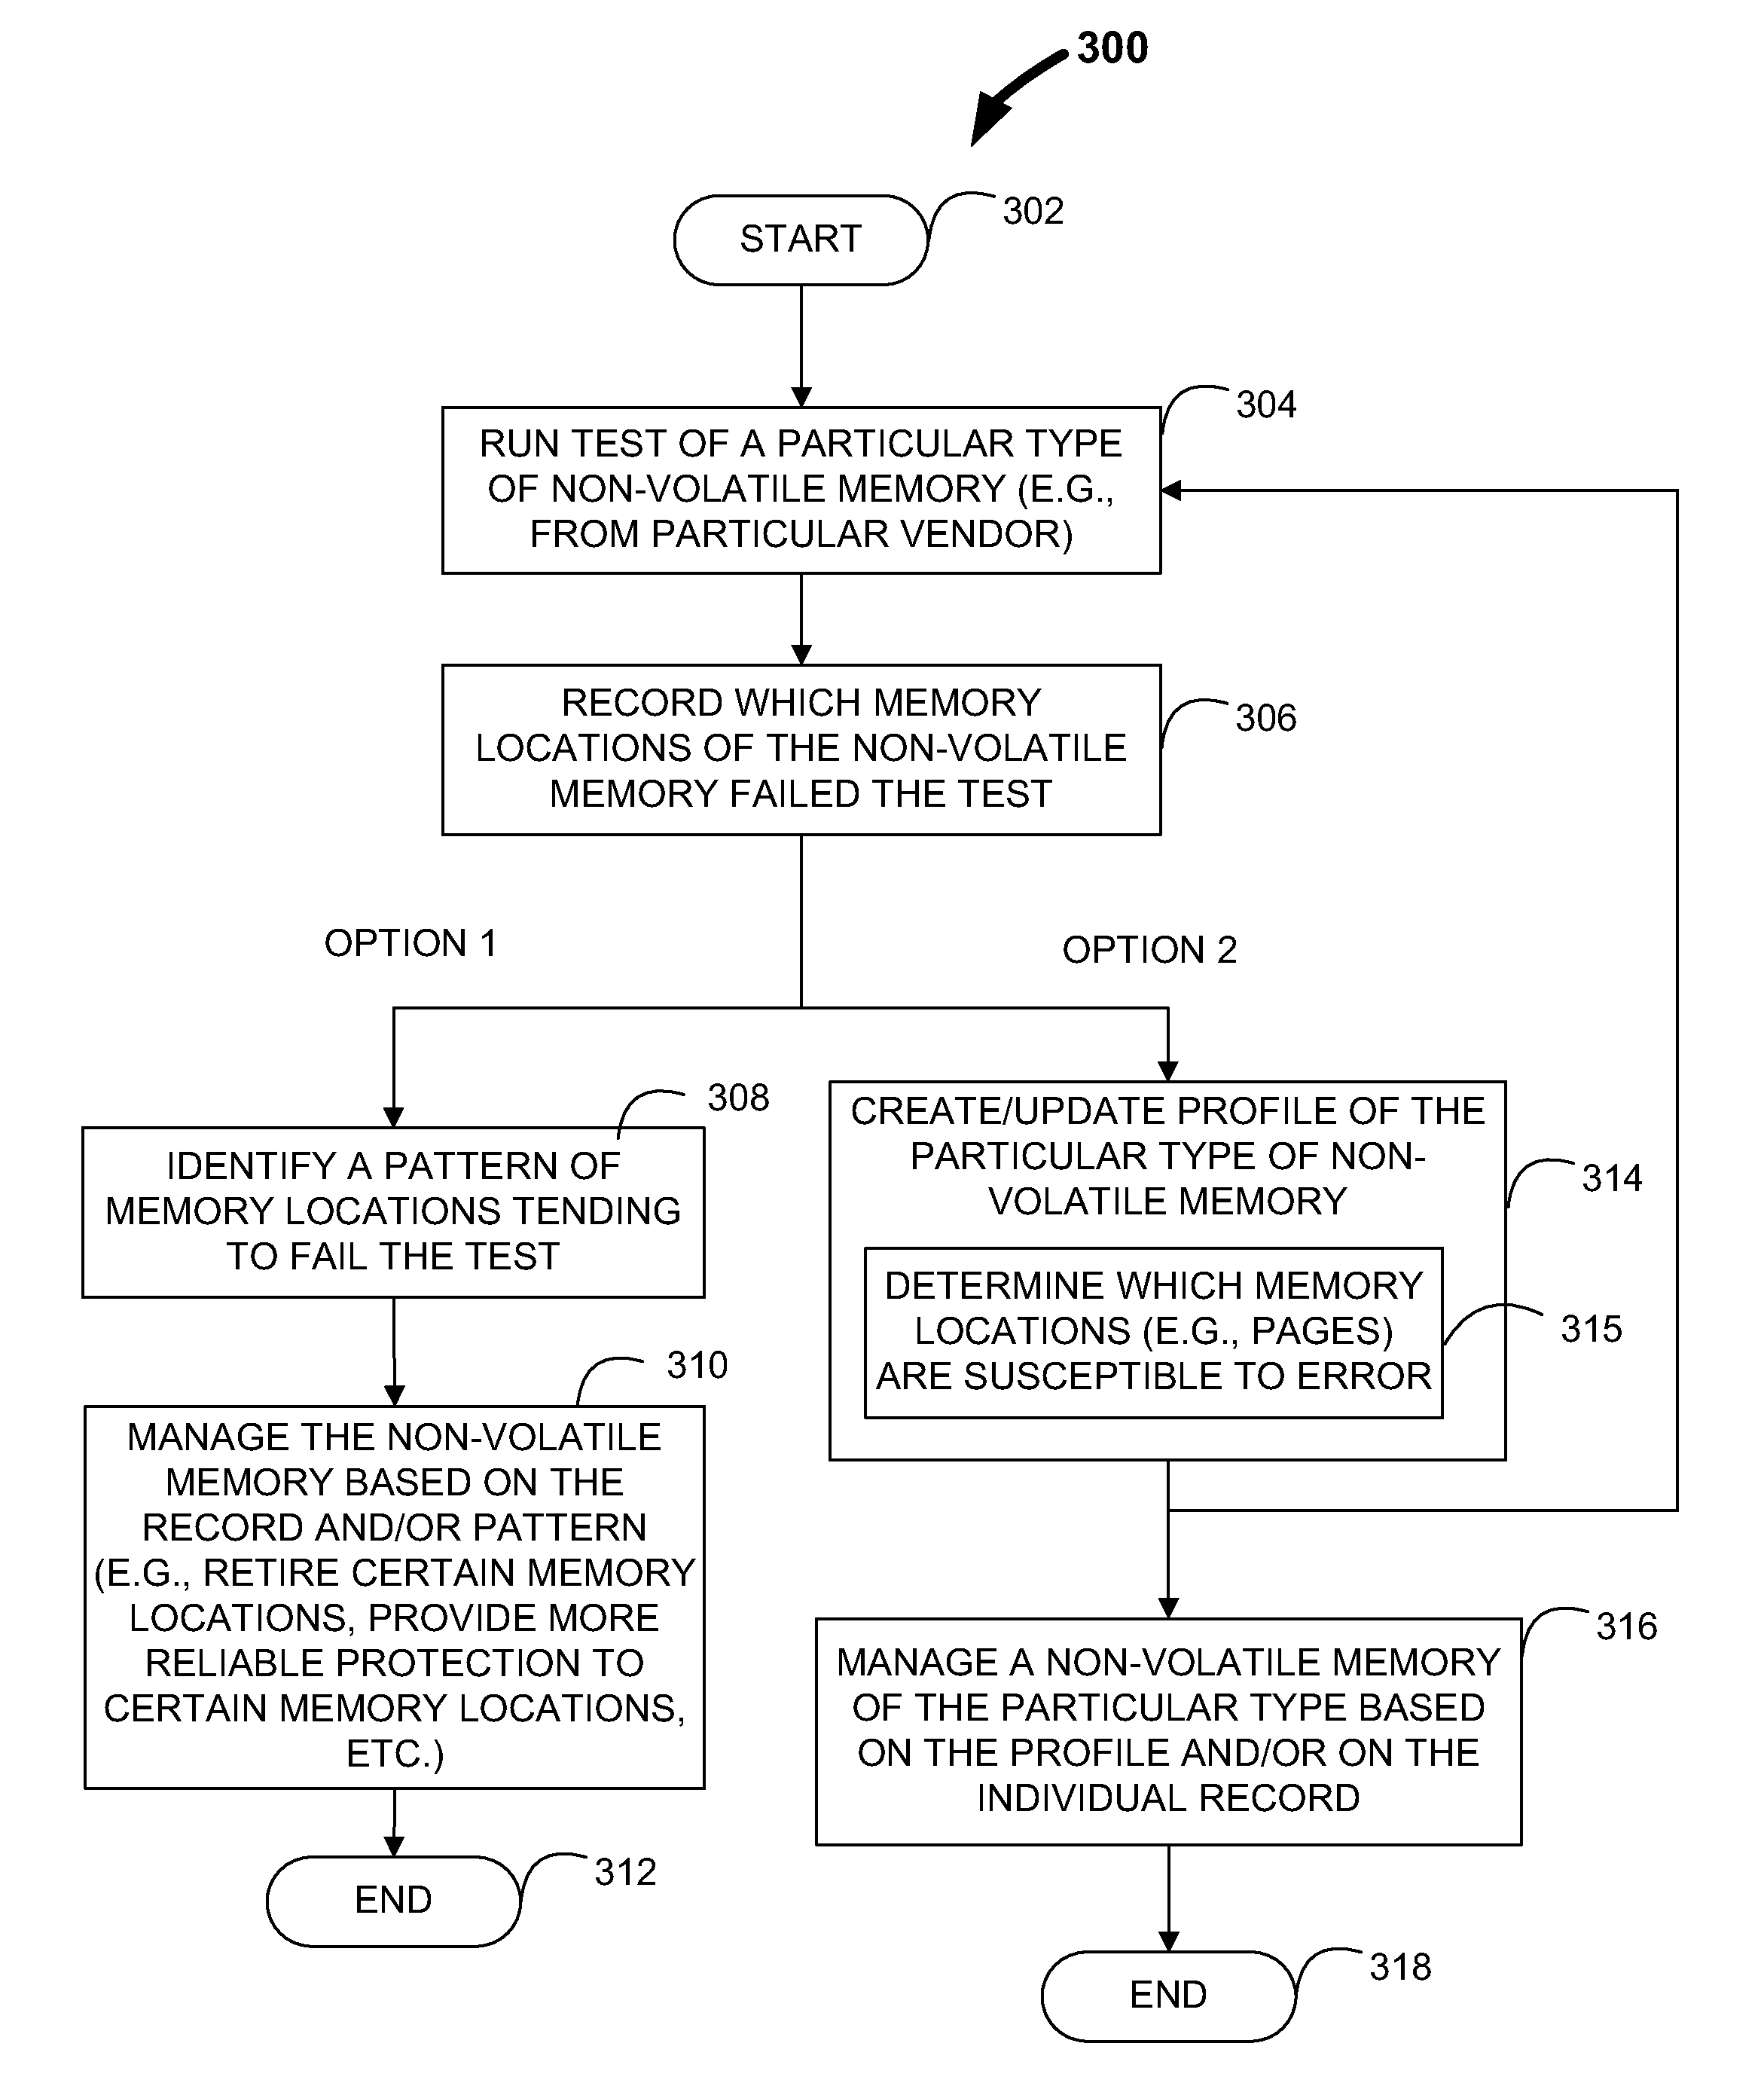 Management of a non-volatile memory based on test quality